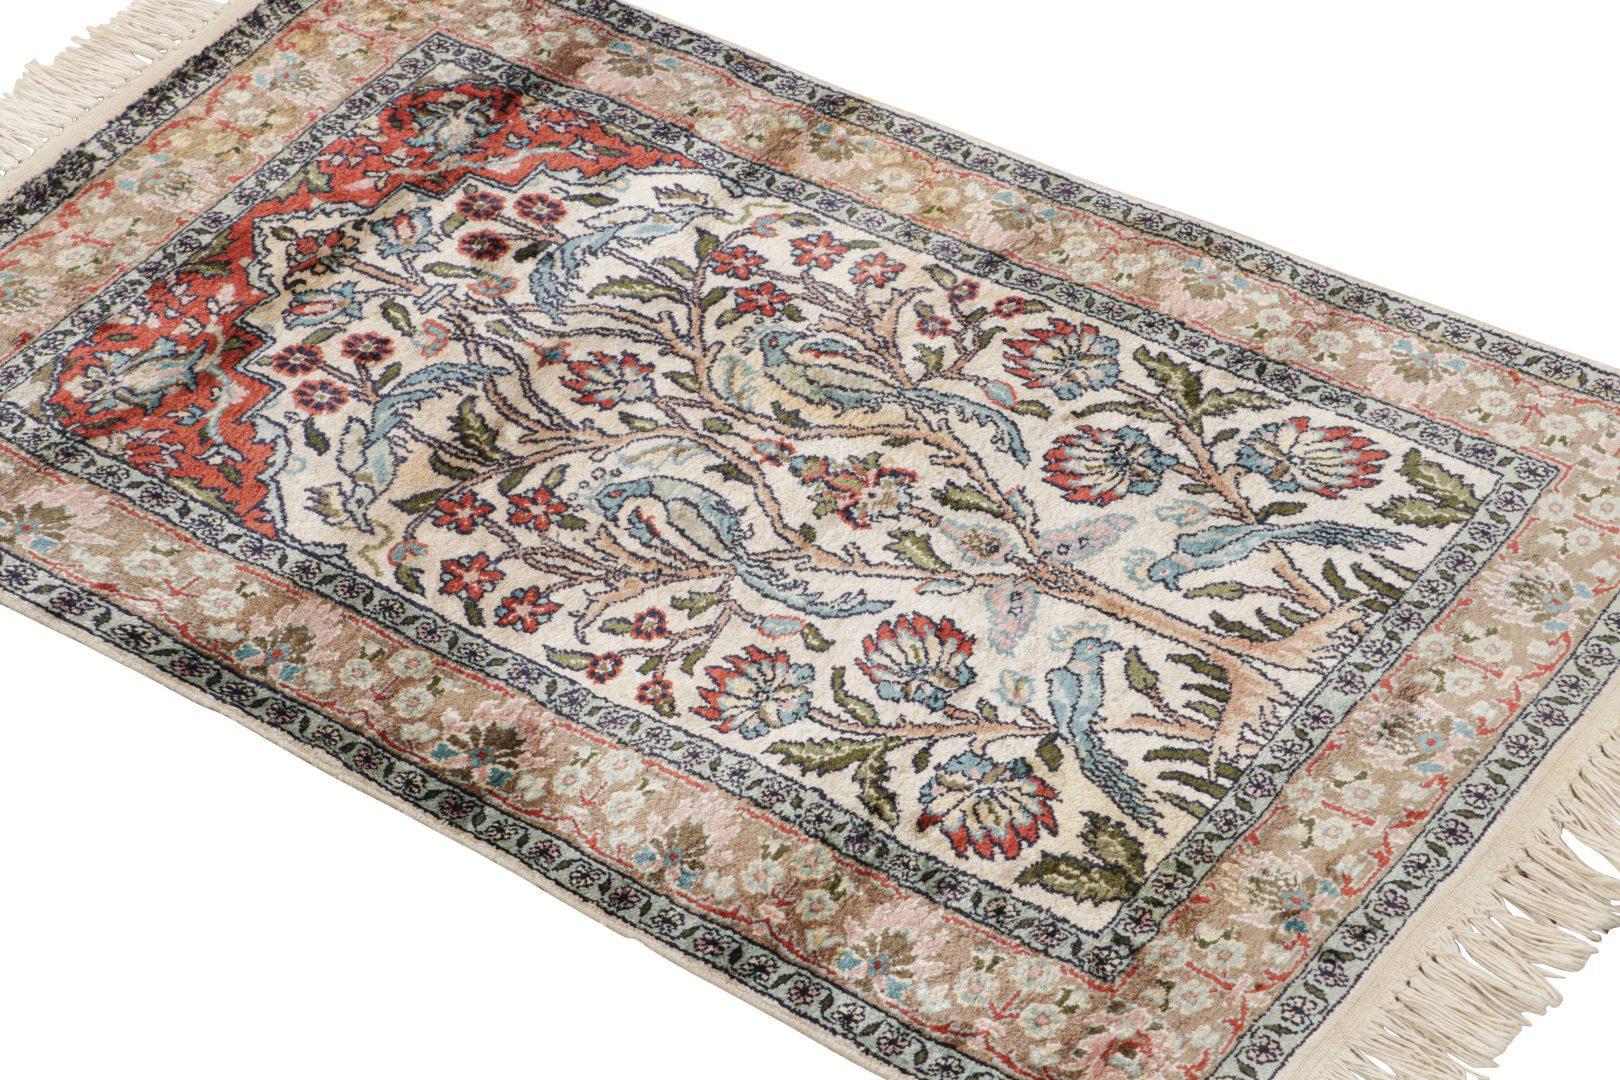 Made with hand-knotted wool and silk circa 1920-1930, this 2×3 antique Kashmir rug is an exciting new curation from Rug & Kilim’s collection of rare Indian rugs. 

On the Design:

Bright beige and white tones  in field and border alike underscore